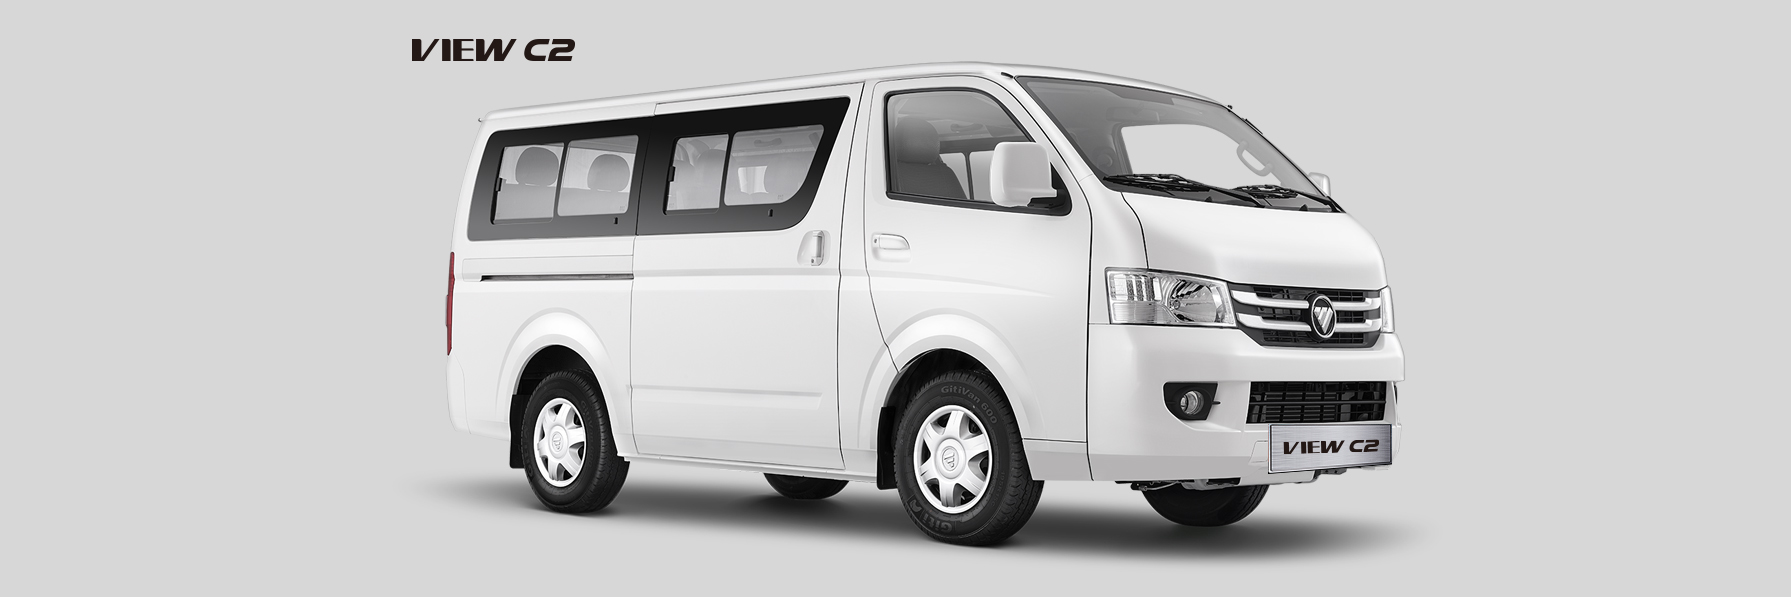 Foton View CS2 15-Seater Coming Soon in Nepal